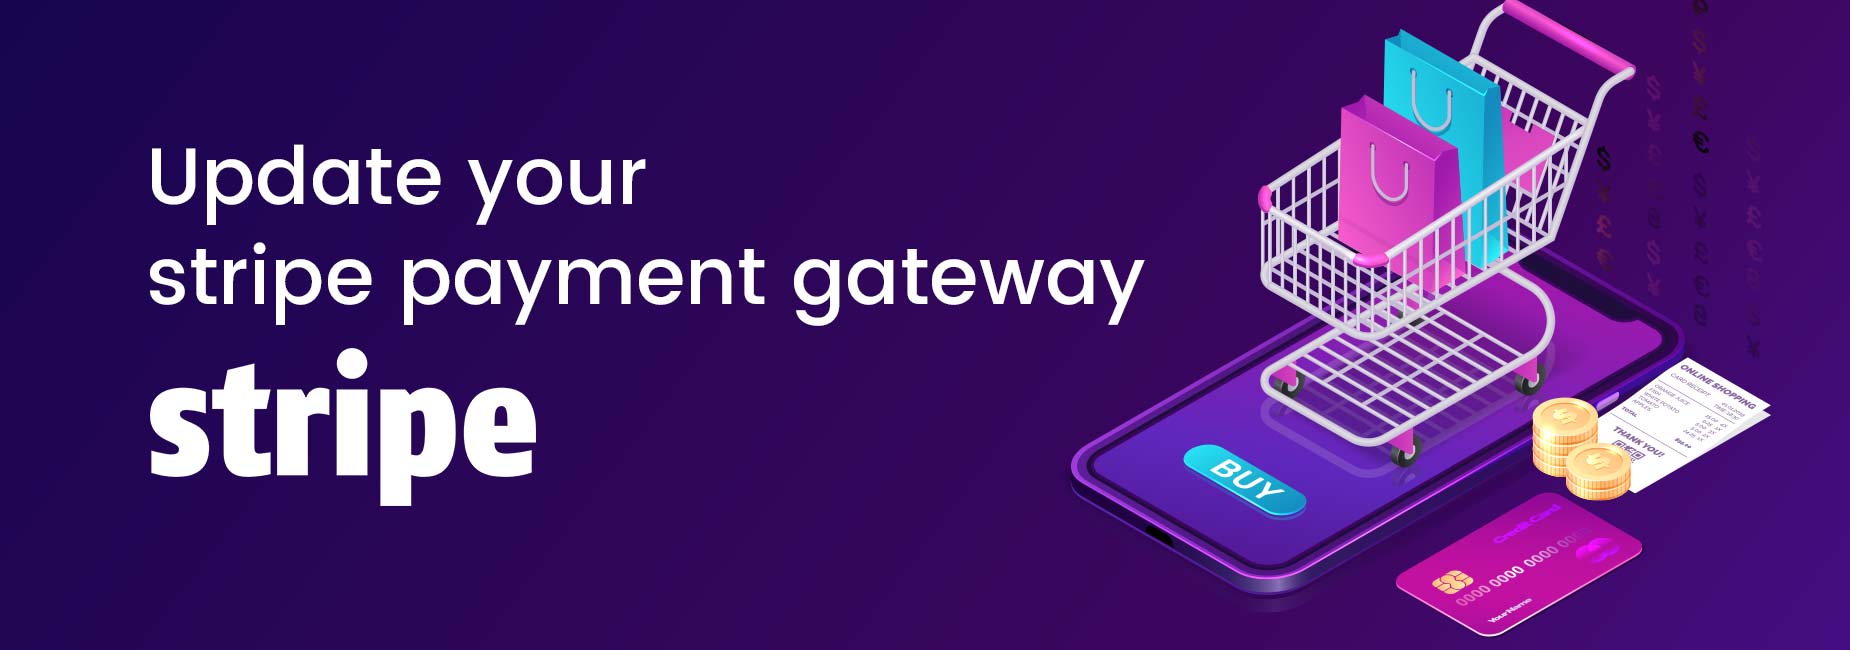 Stripe payment gateway update – added SCA for online payments